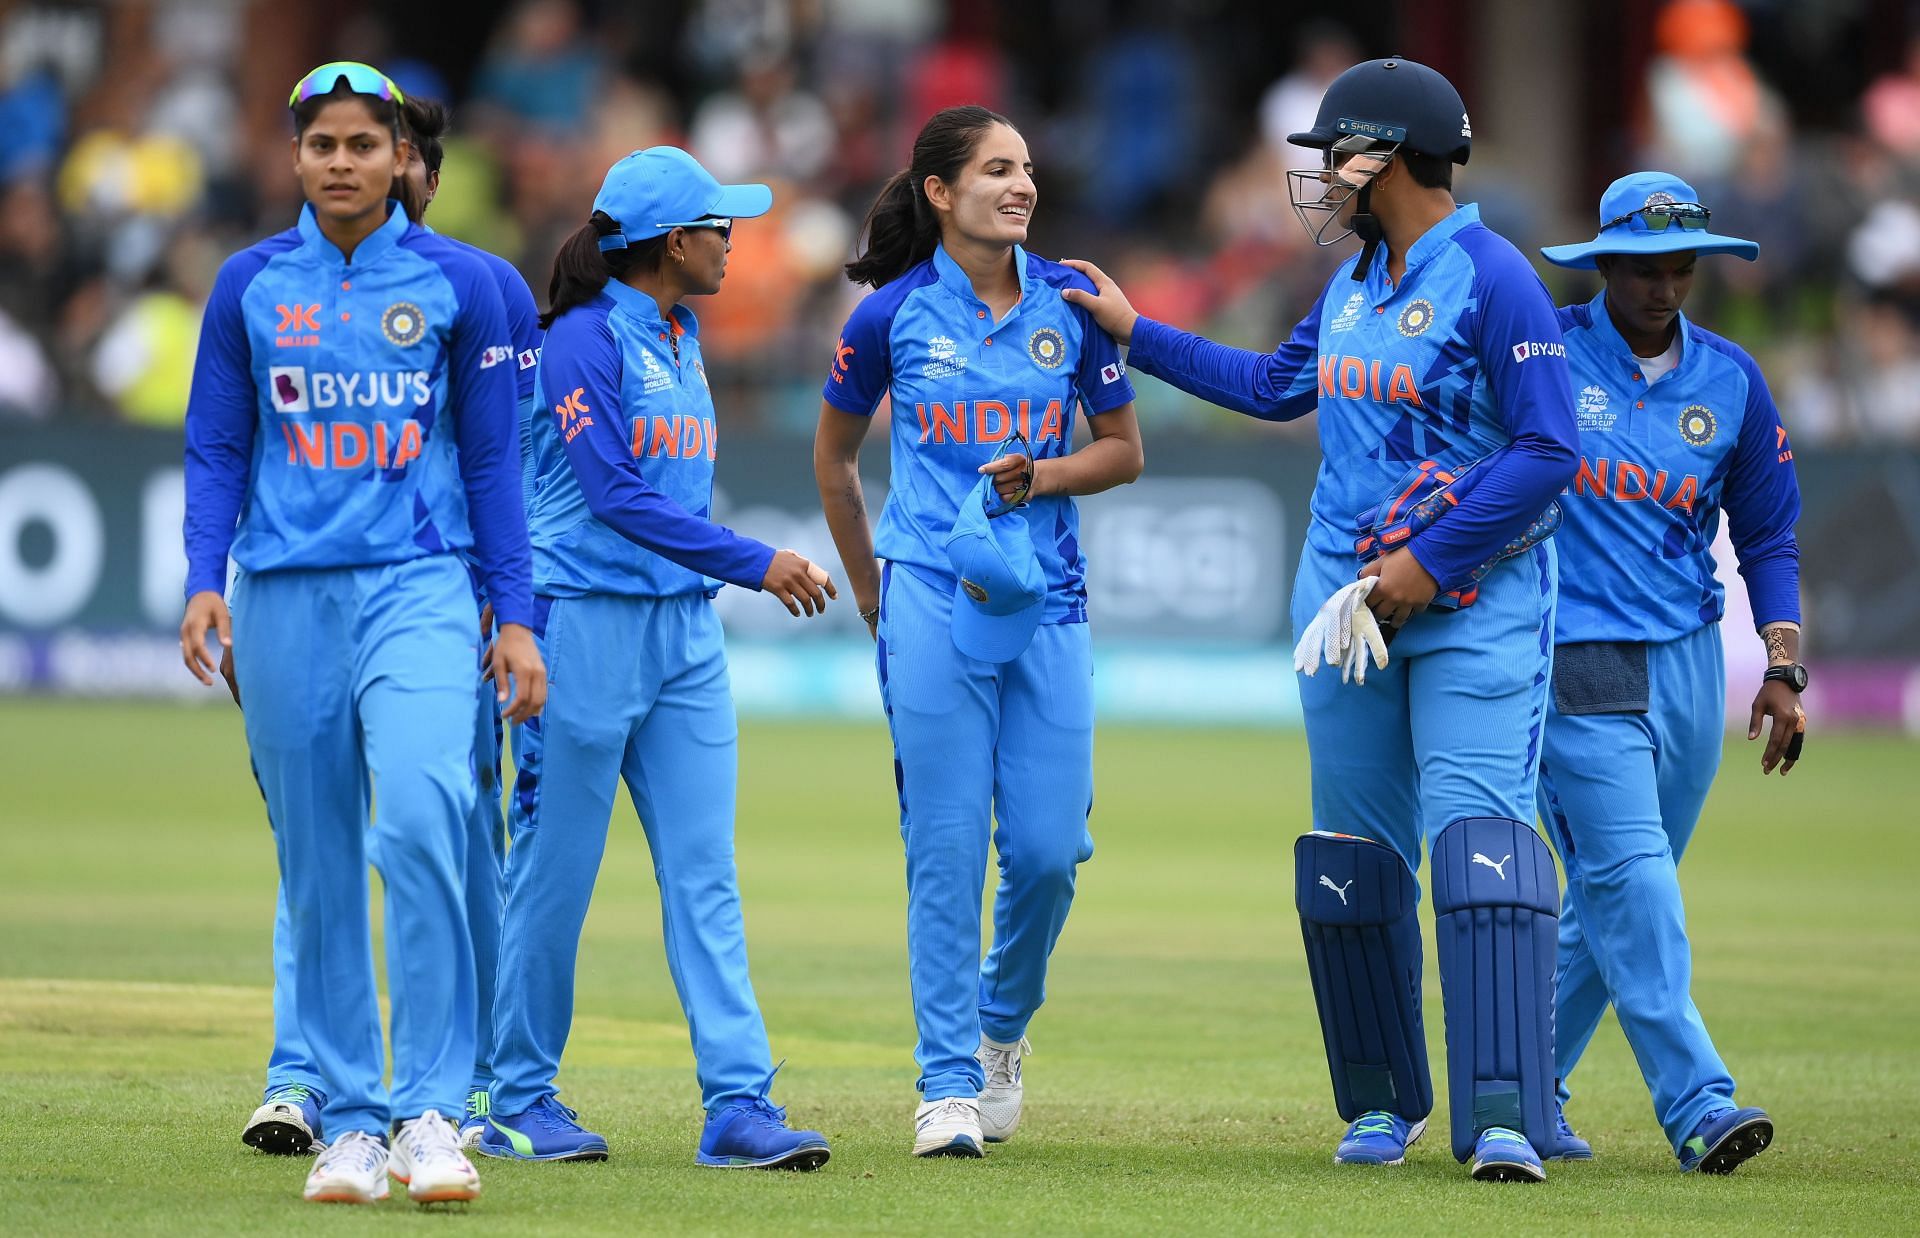 The pacer celebrates a wicket with her teammates. Pic: Getty Images